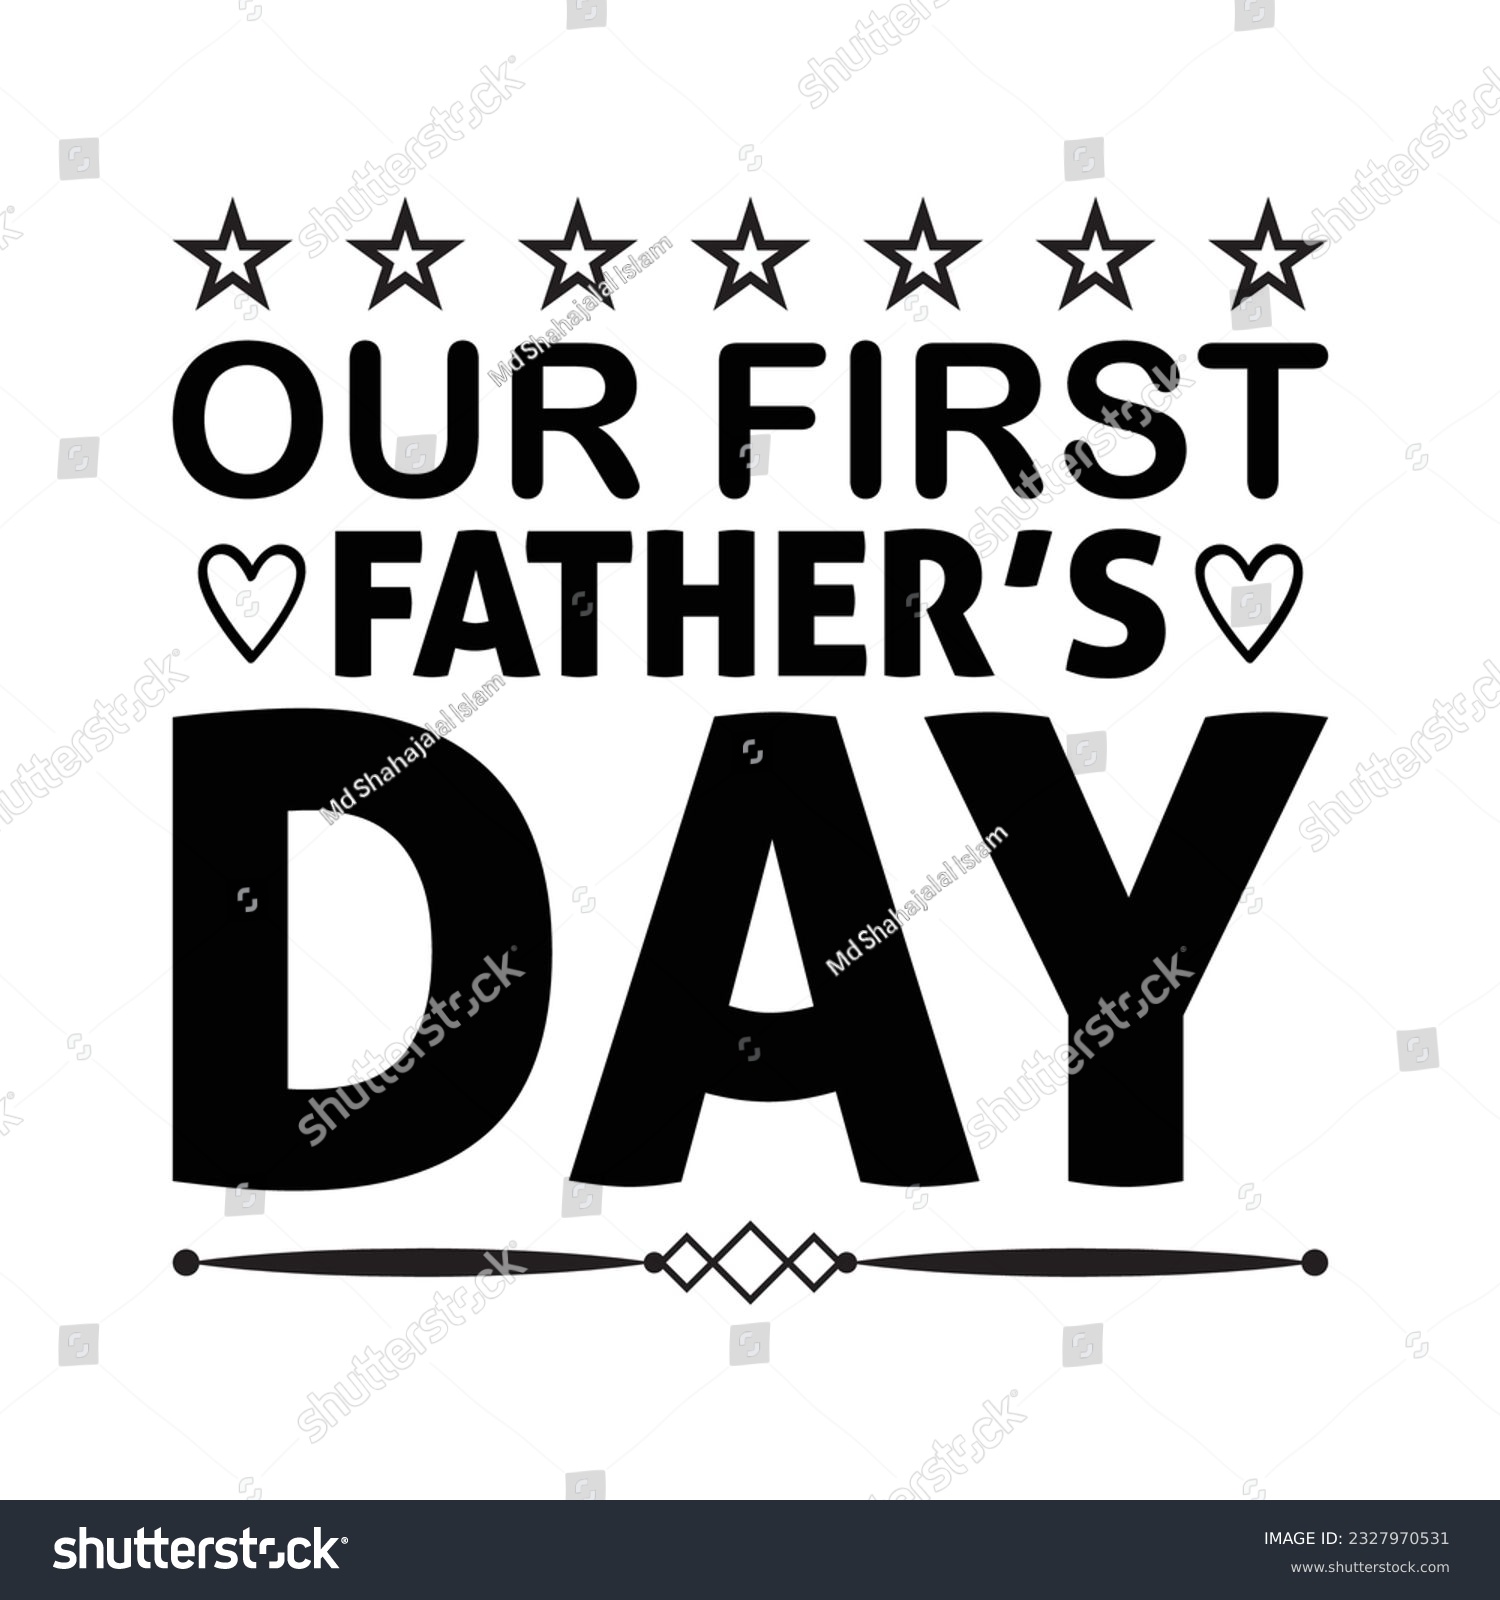 SVG of Our first father's day, father's day SVG shirt design, happy fathers day shirt print template, daddy, papa, dad, father shirt design svg